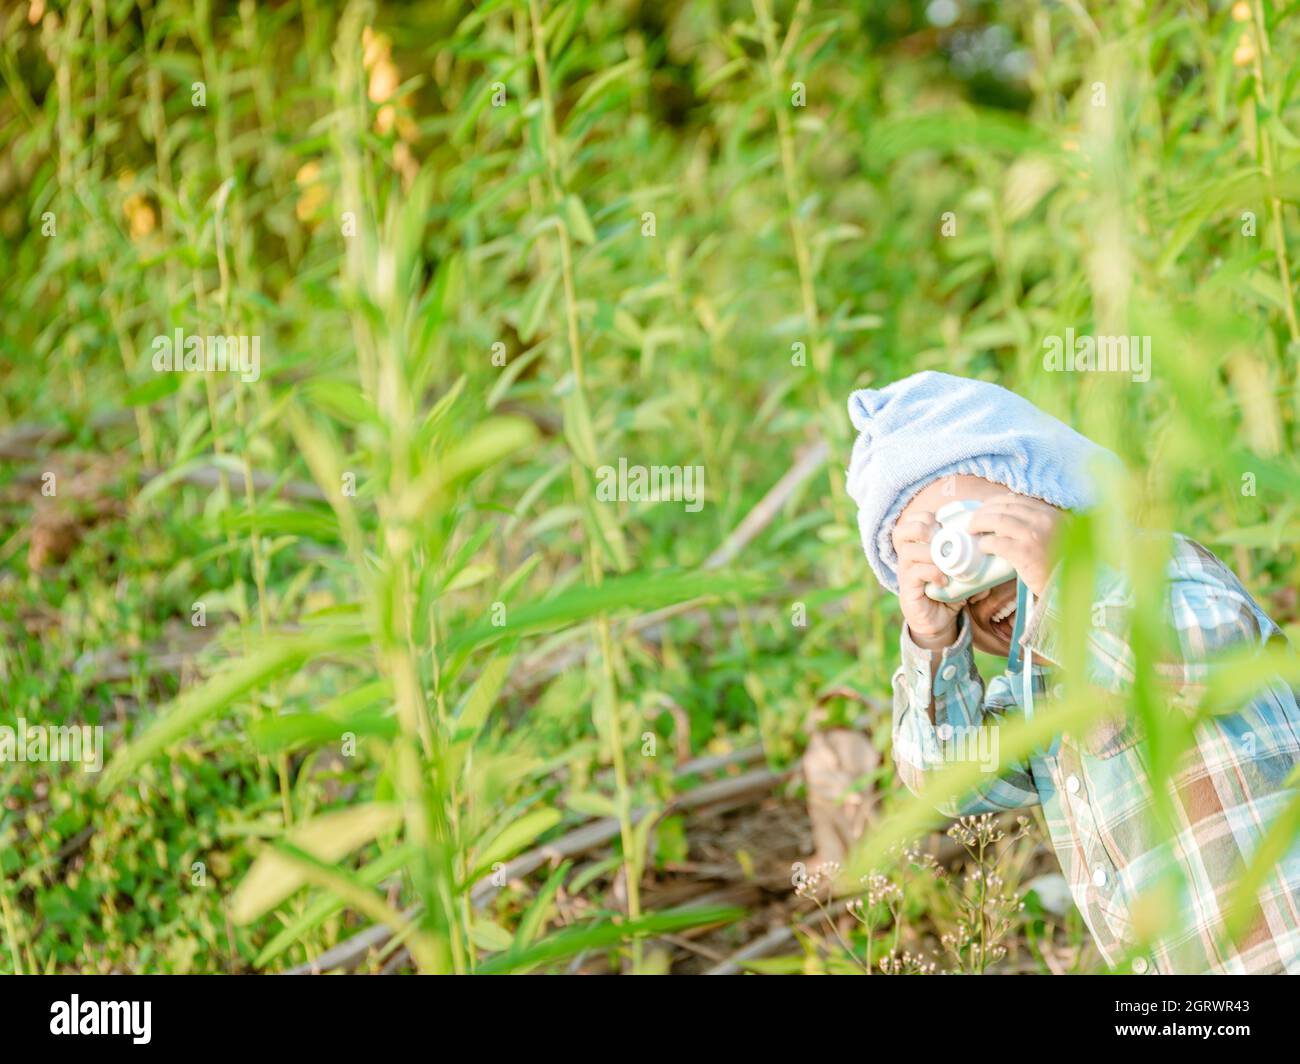 Girl Holding Toy Camera Amidst Plants Stock Photo